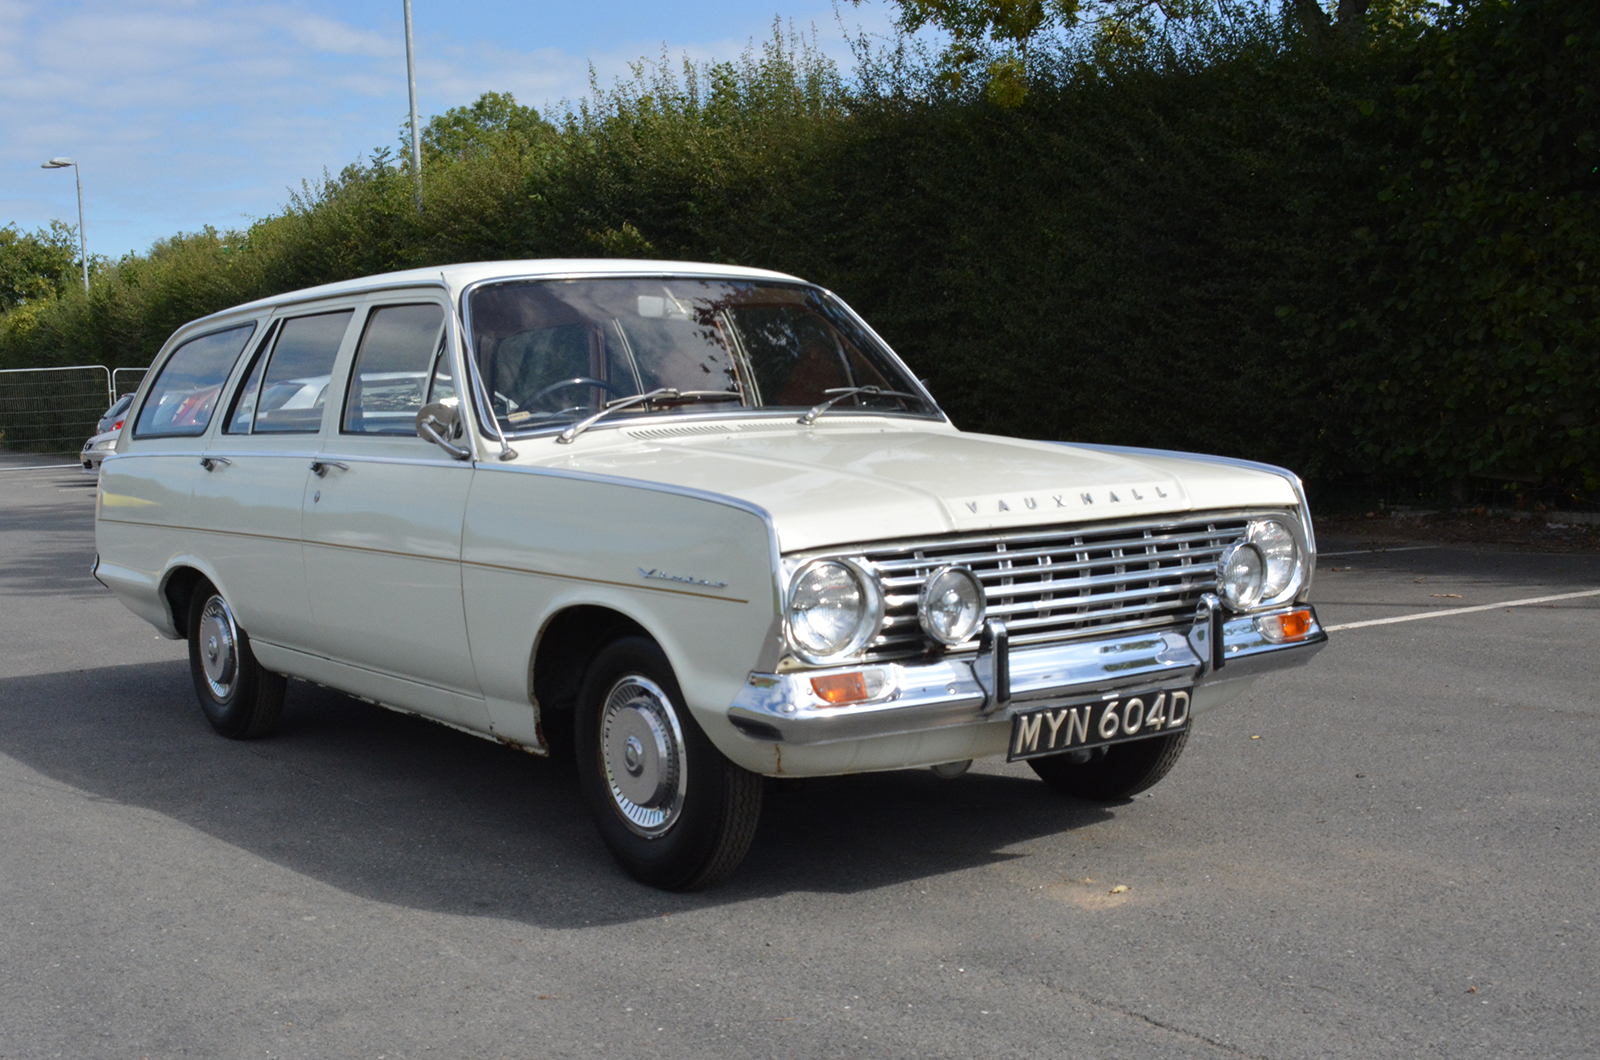 Classic & Sports Car – 11 cars from Vauxhall’s Heritage Collection for sale